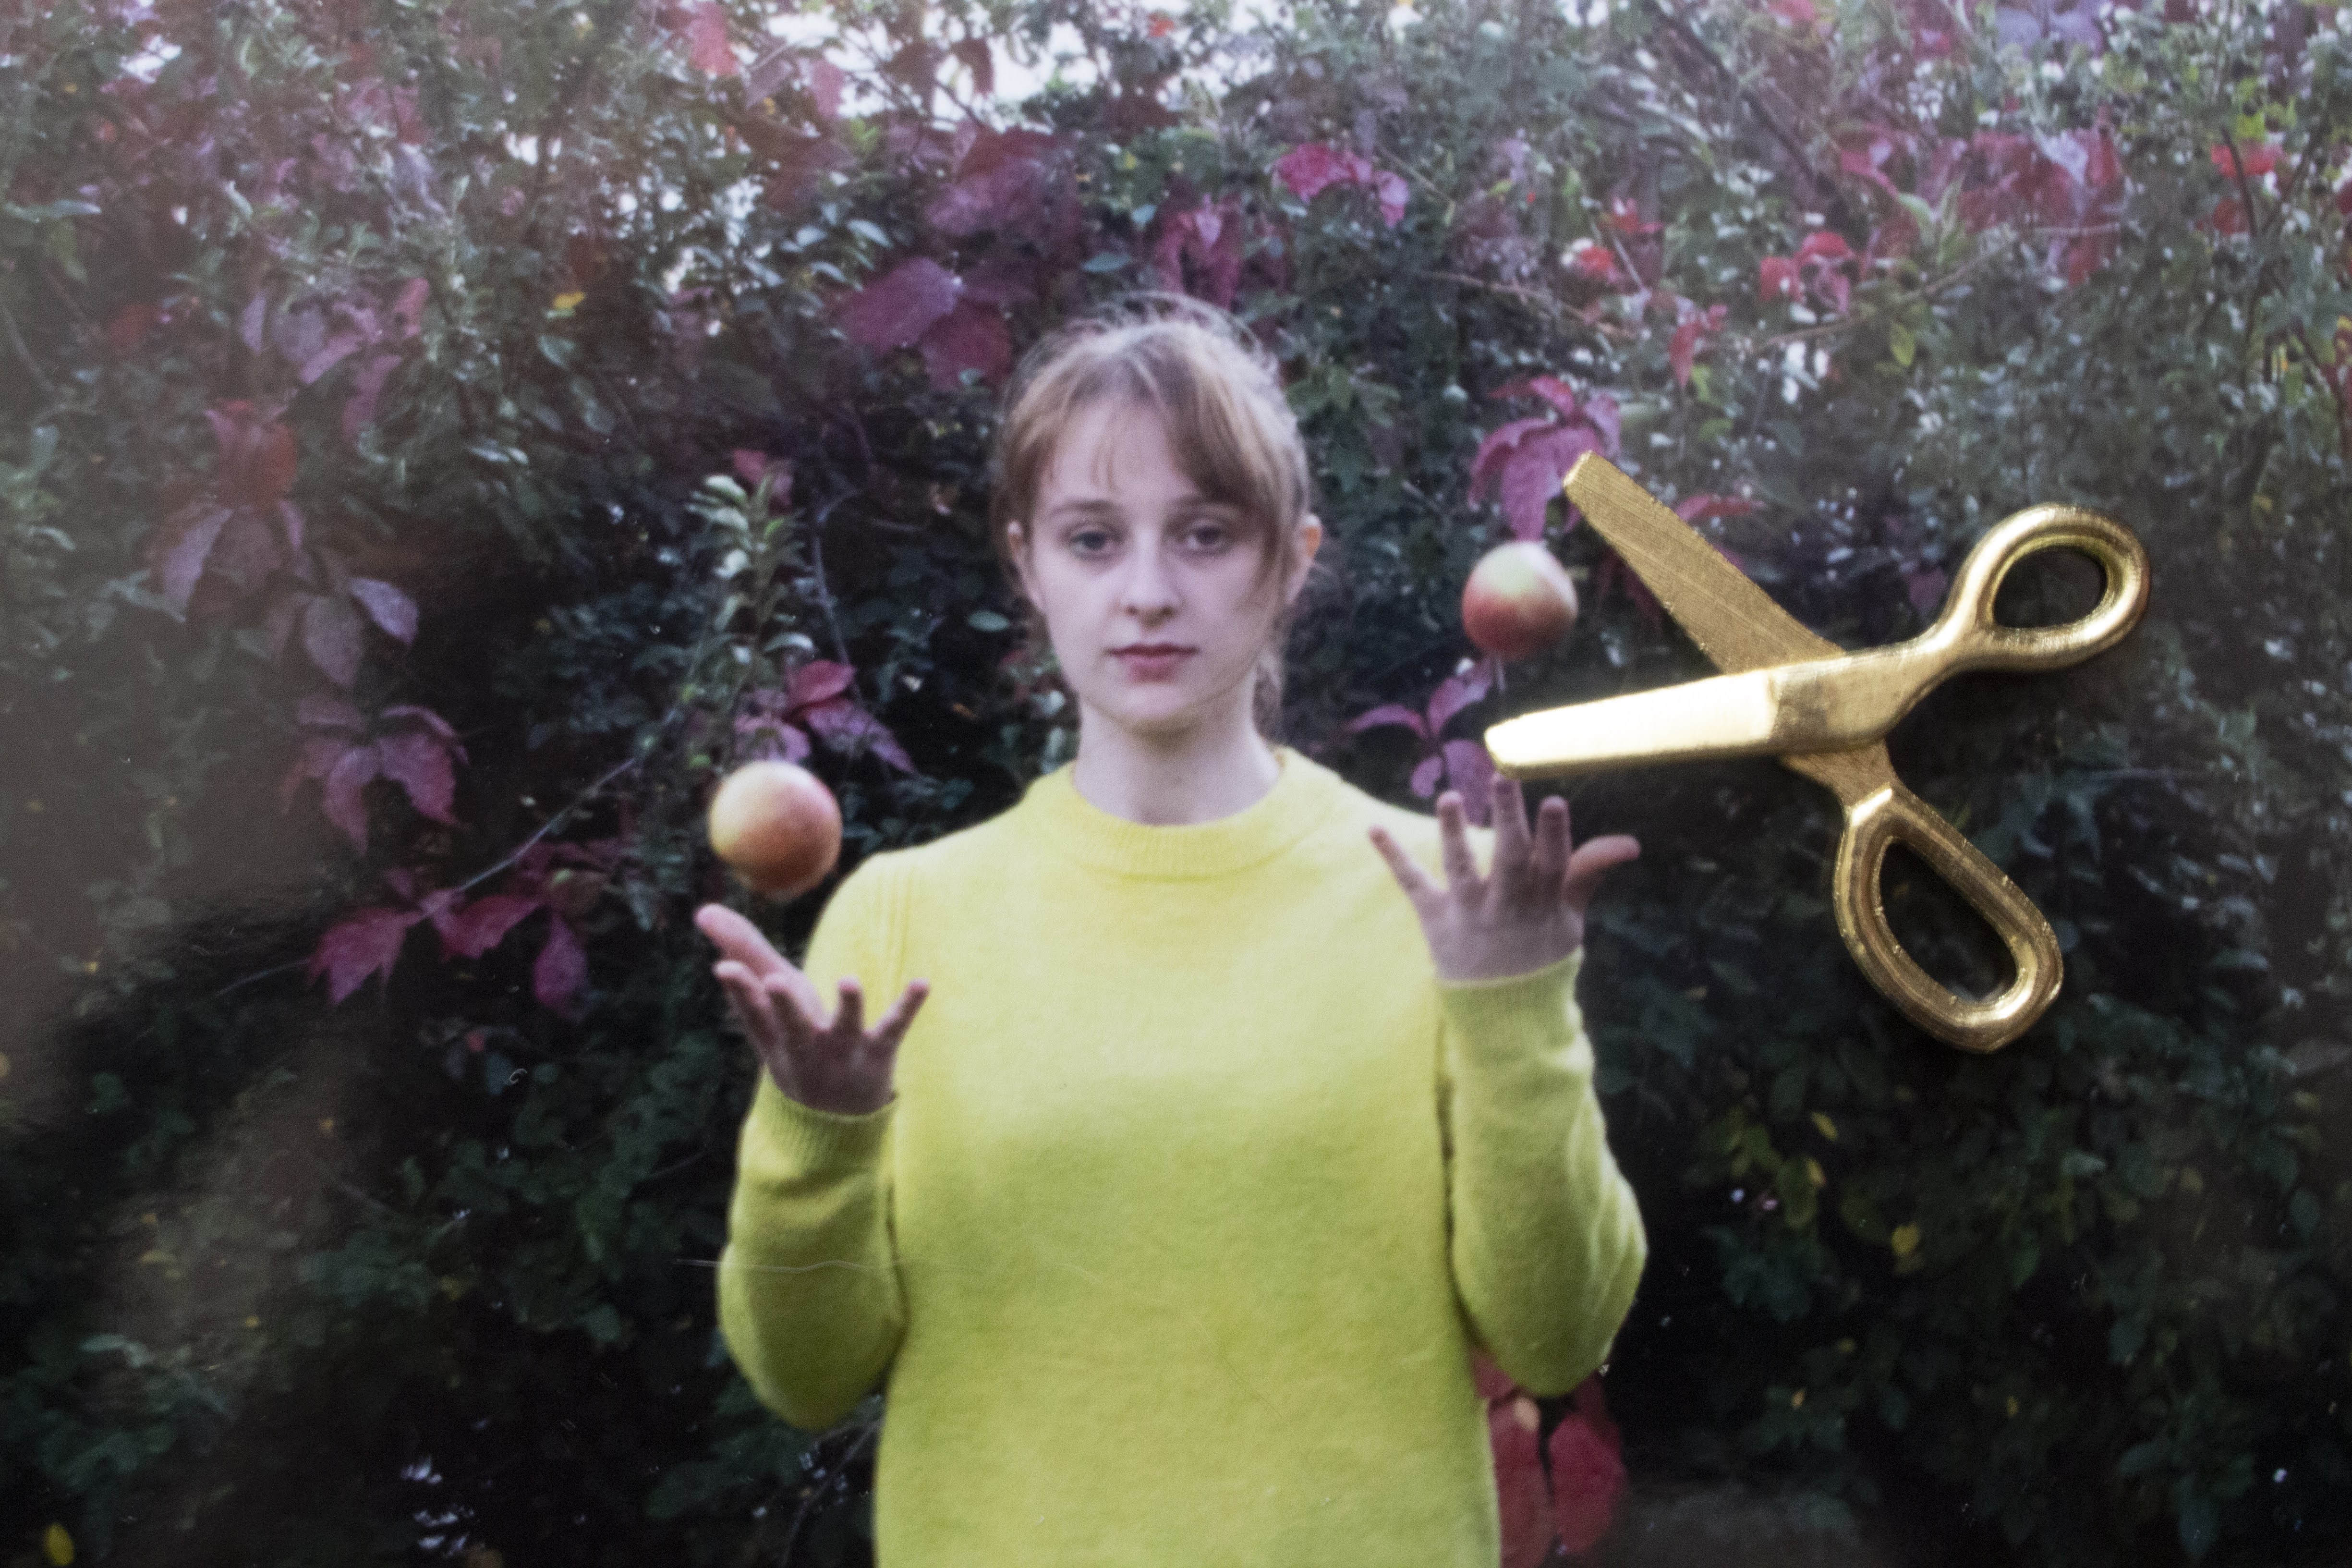 A blonde woman in a yellow sweater is outside, throwing apples up into the air. They are frozen next to her in the photograph. On top of the photograph, a miniature pair of golden scissors sits, looking as if it is about to cut one of the apples.